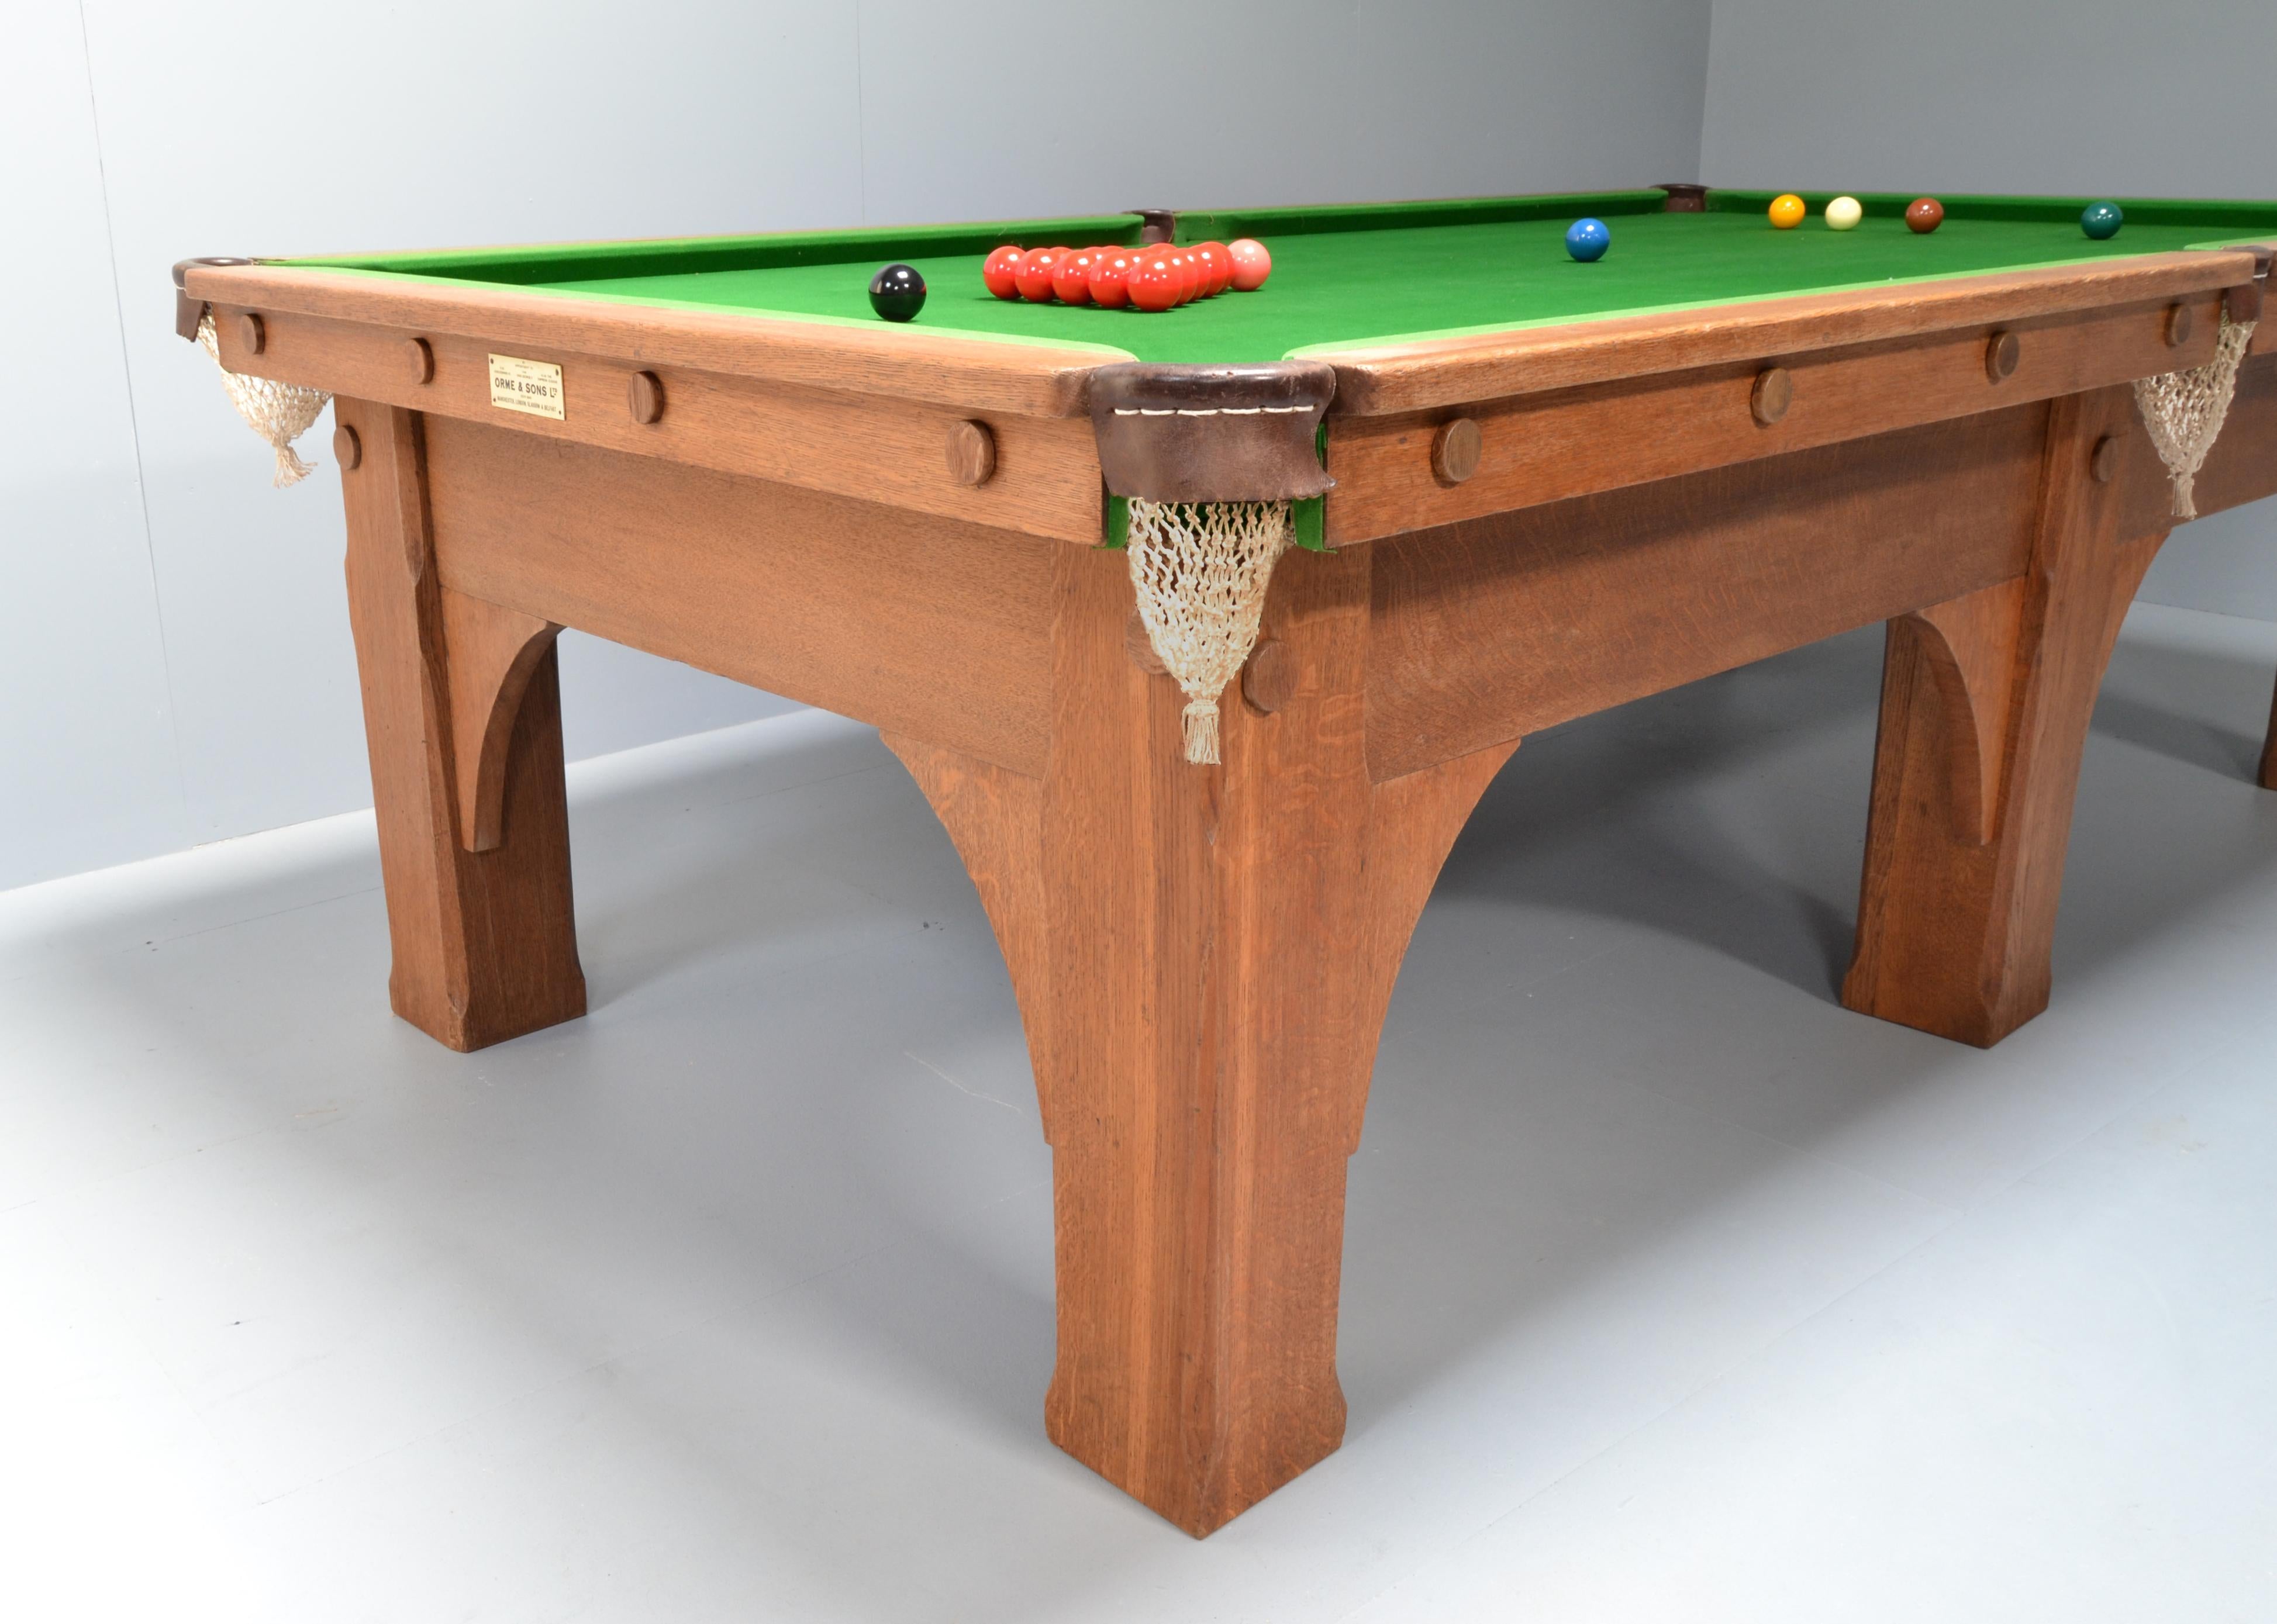 An English Arts & Crafts solid oak billiard, snooker or pool table made by Orme & Sons, circa 1910.

Standing on six square chamfered legs with substantial arched brackets, the legs and cushion edges are fitted with applied bosses.

All